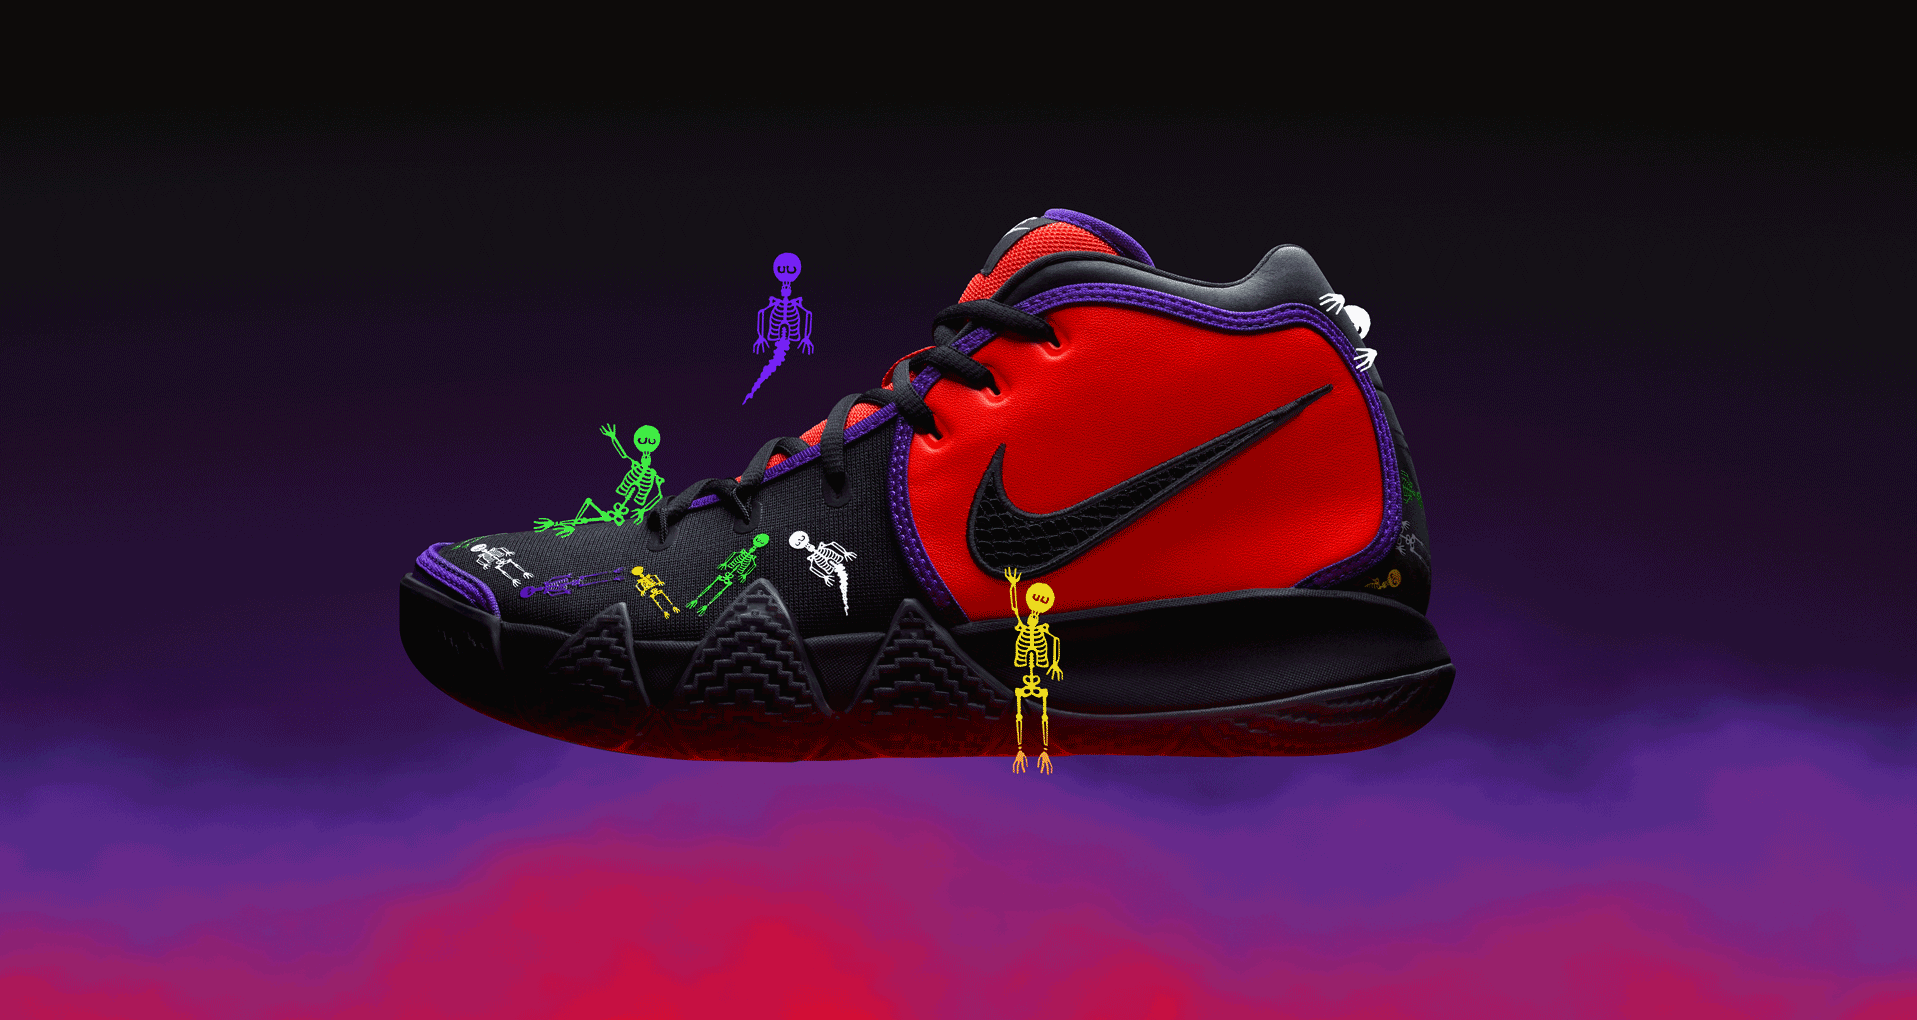 https://c.static-nike.com/a/images/w_1920,c_limit,f_auto/glink7b5fejzmdffilpu/kyrie-4-day-of-the-dead-release-date.gif